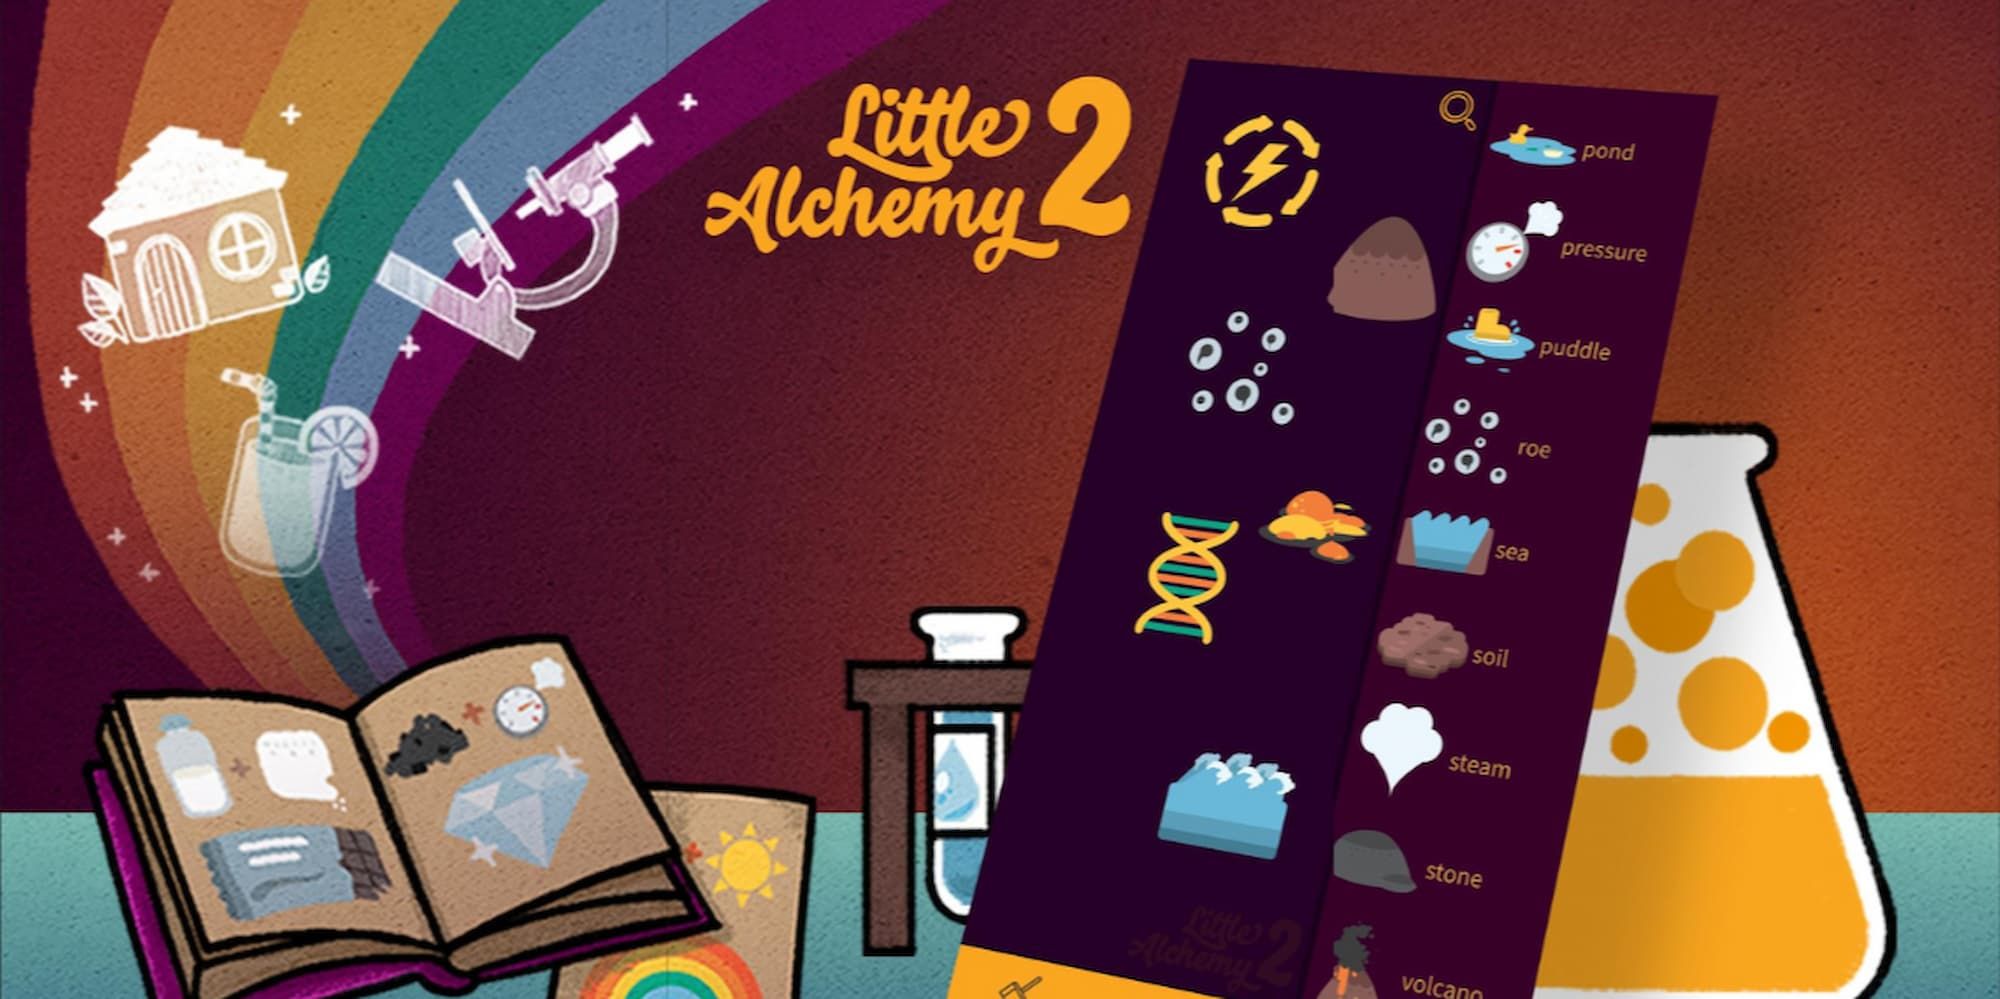 How to Make Little Alchemy 2 Time - Use Best Little Alchemy Cheats Now